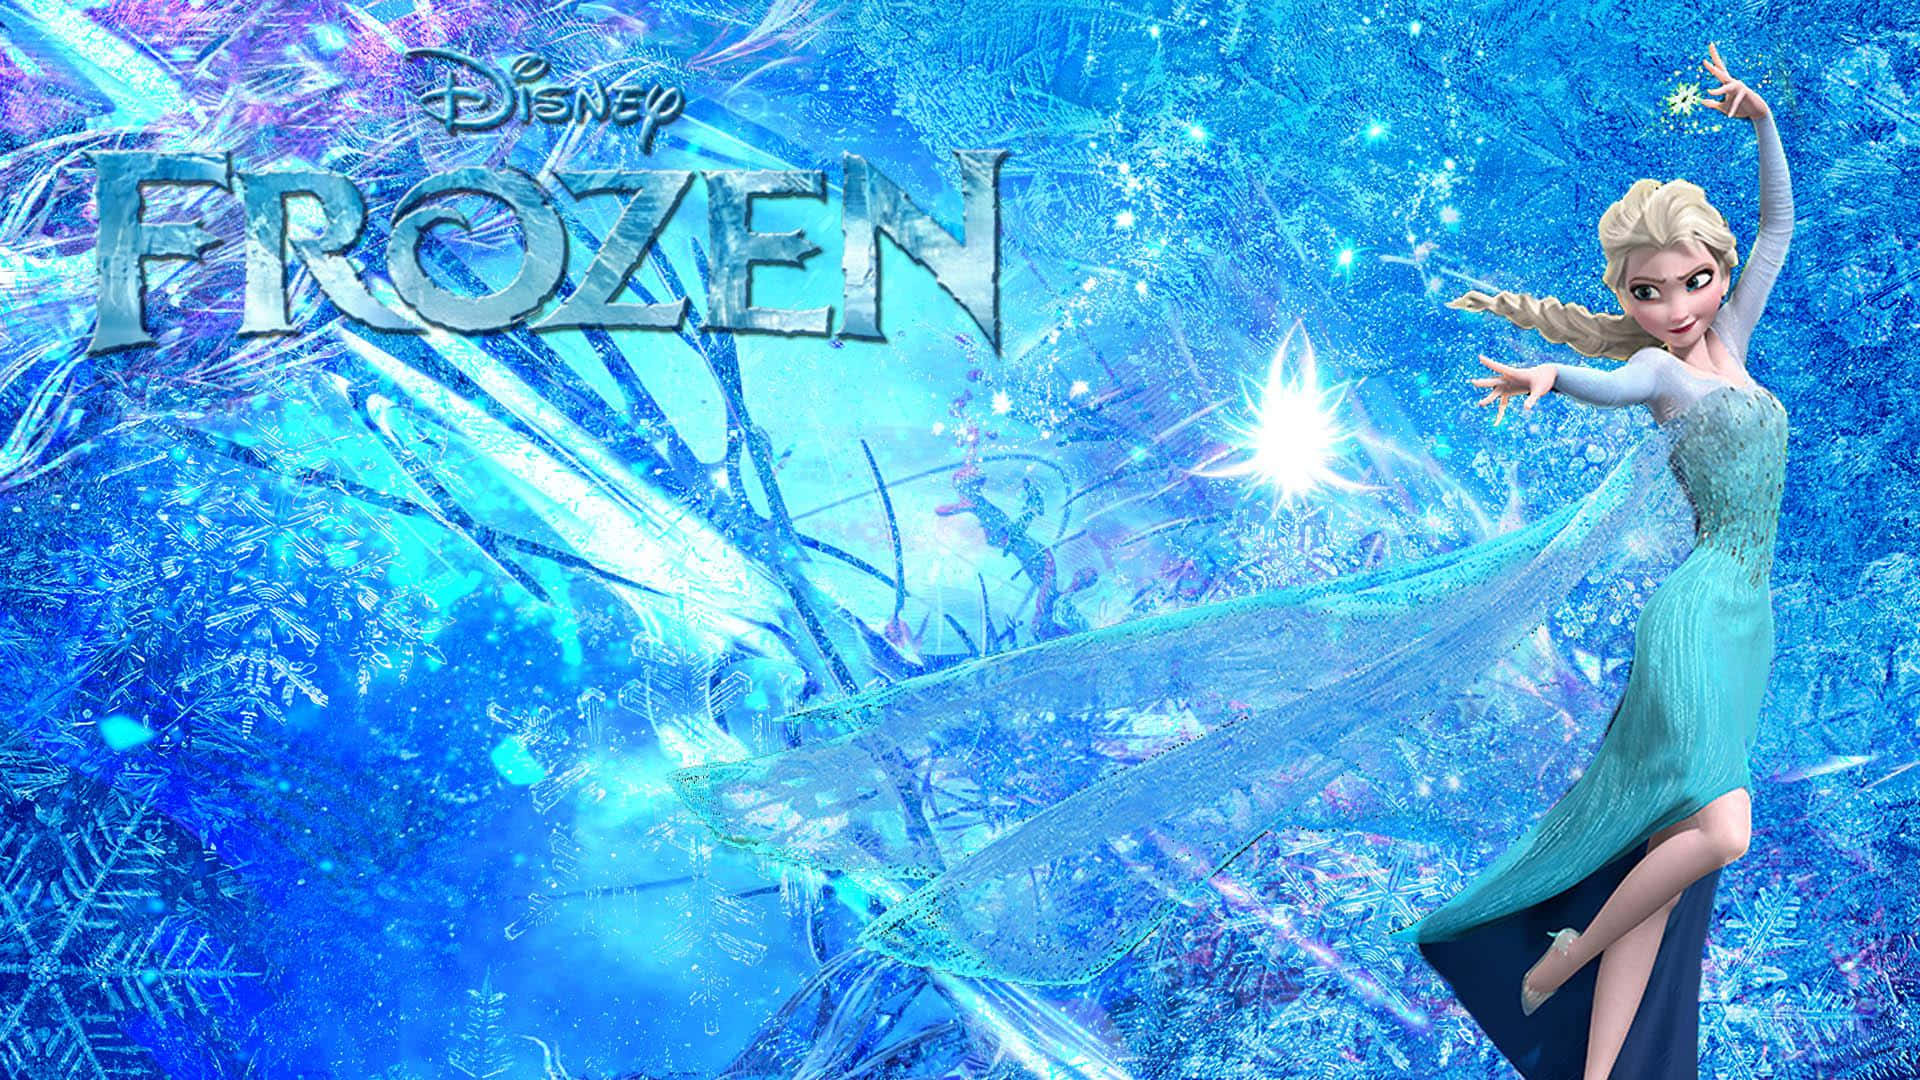 A Magical Winter Background Featuring Elsa from Frozen